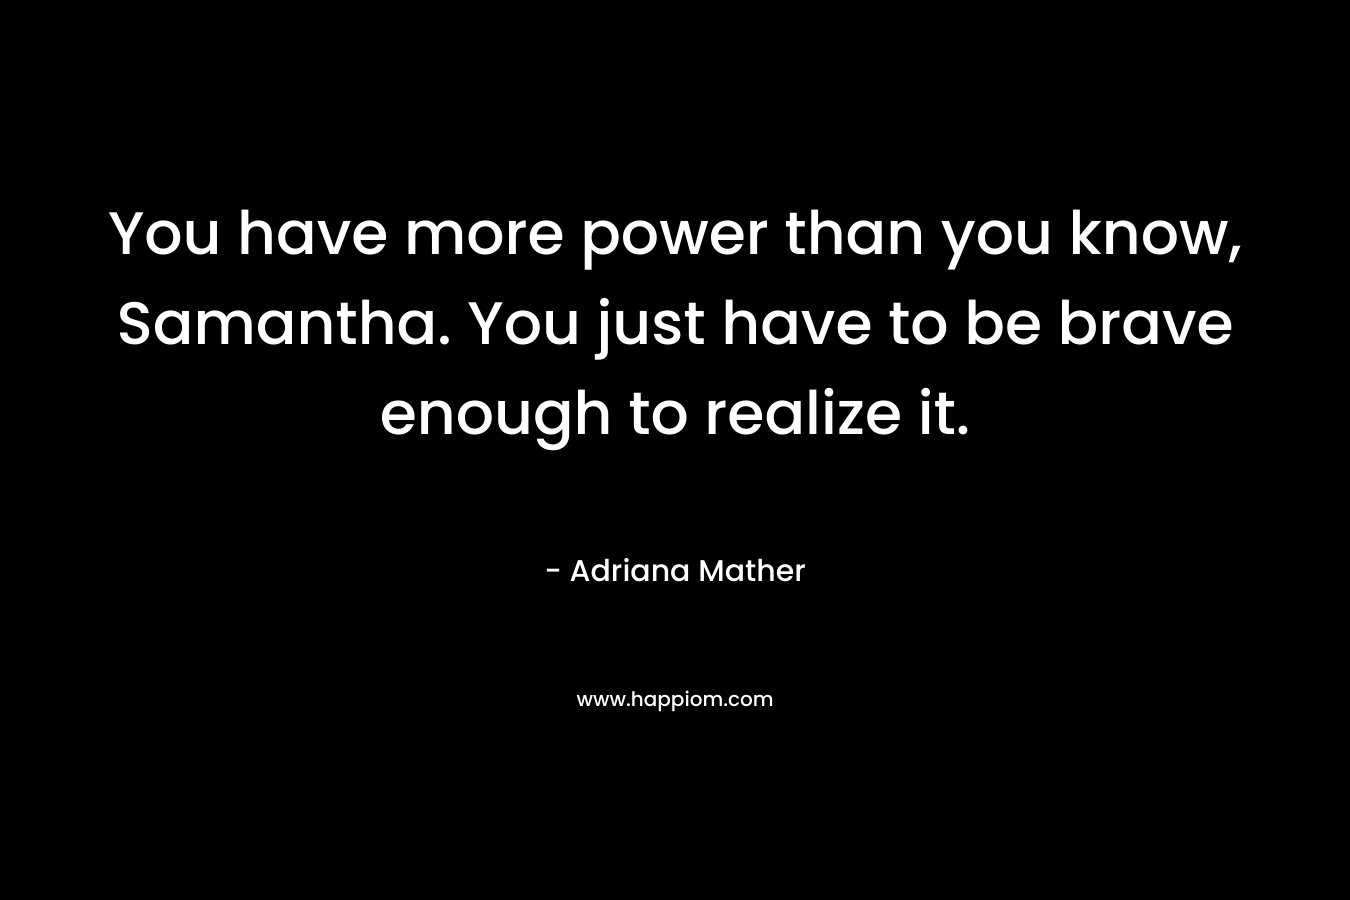 You have more power than you know, Samantha. You just have to be brave enough to realize it. – Adriana Mather